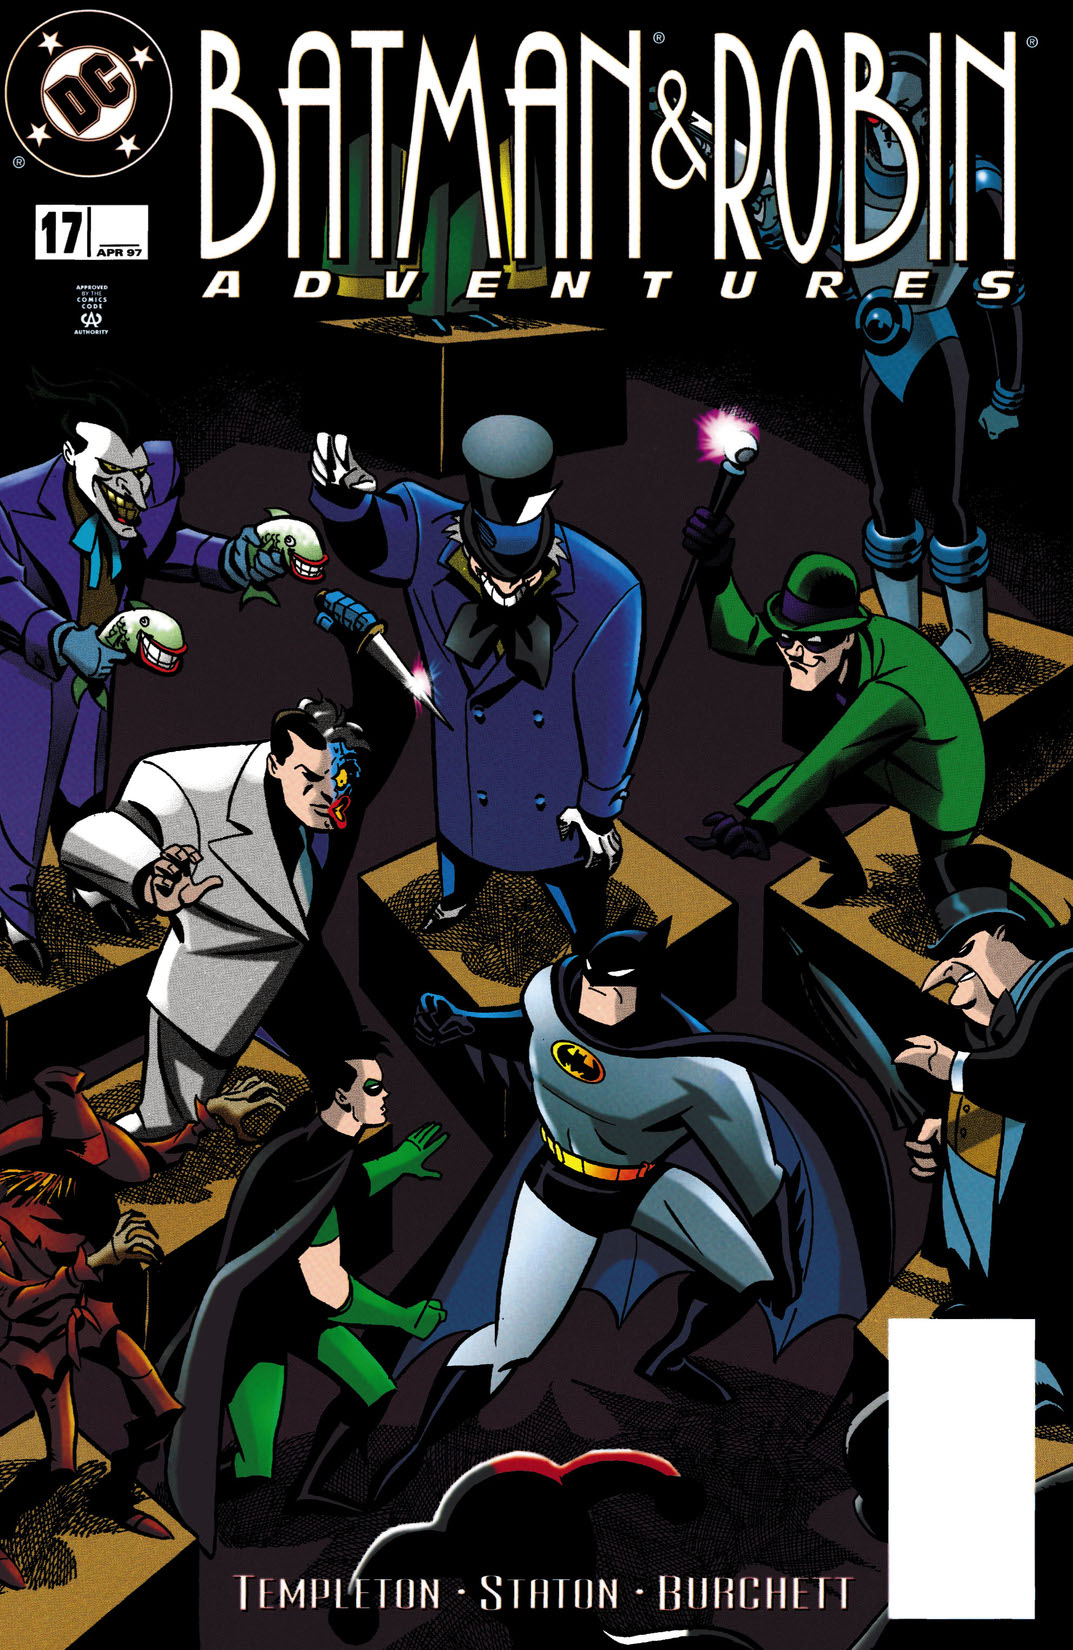 The Batman and Robin Adventures #17 preview images